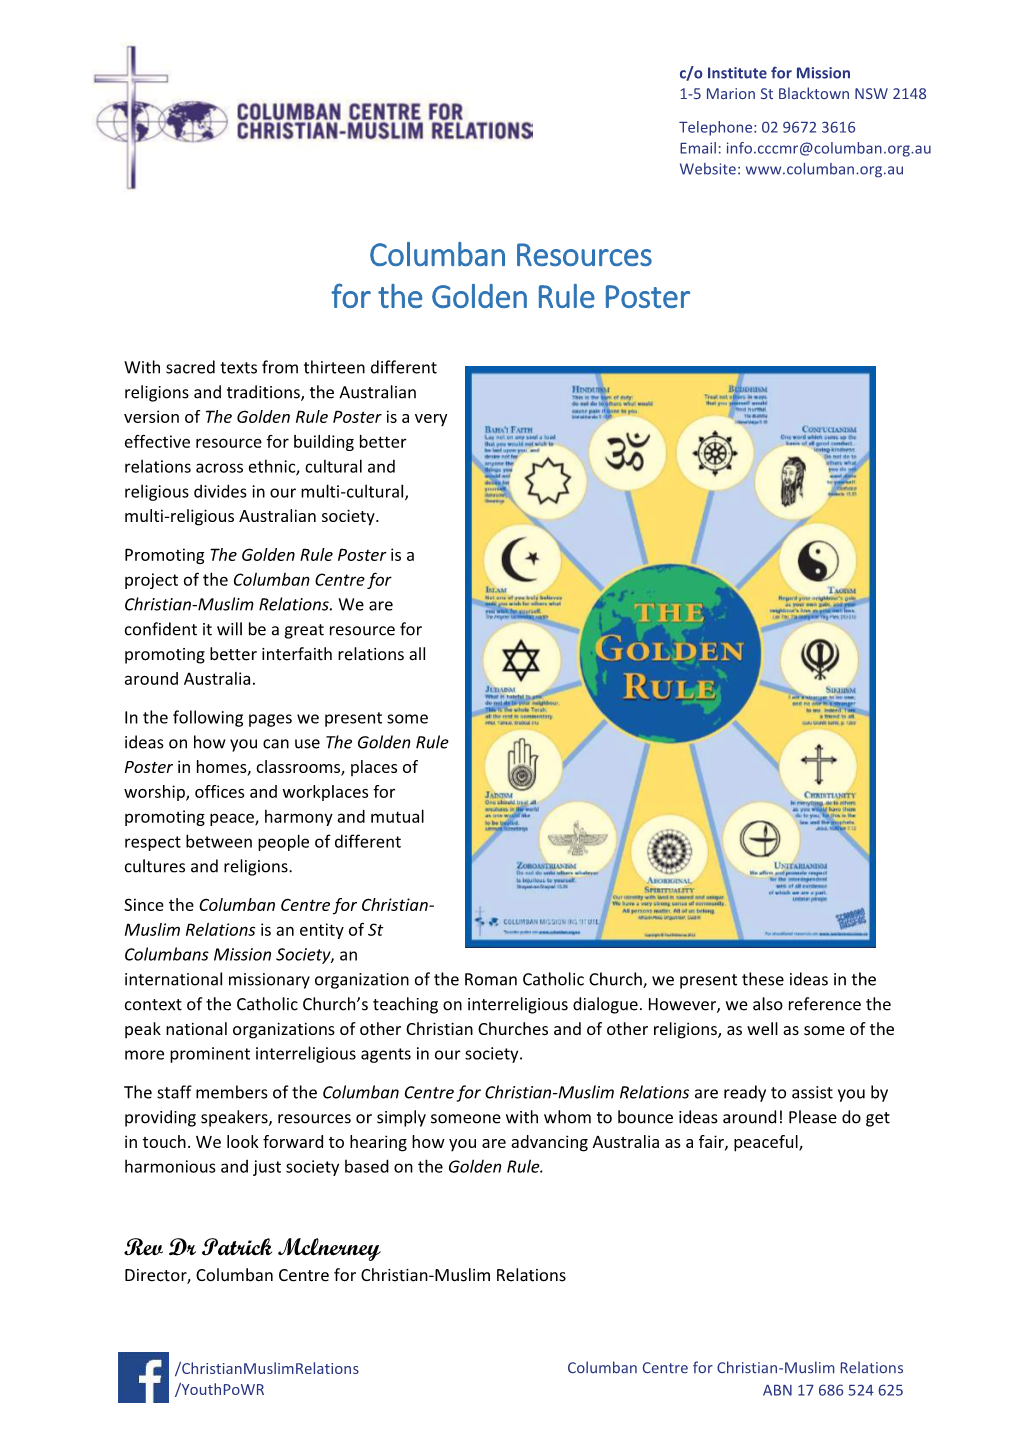 Columban Resources for the Golden Rule Poster